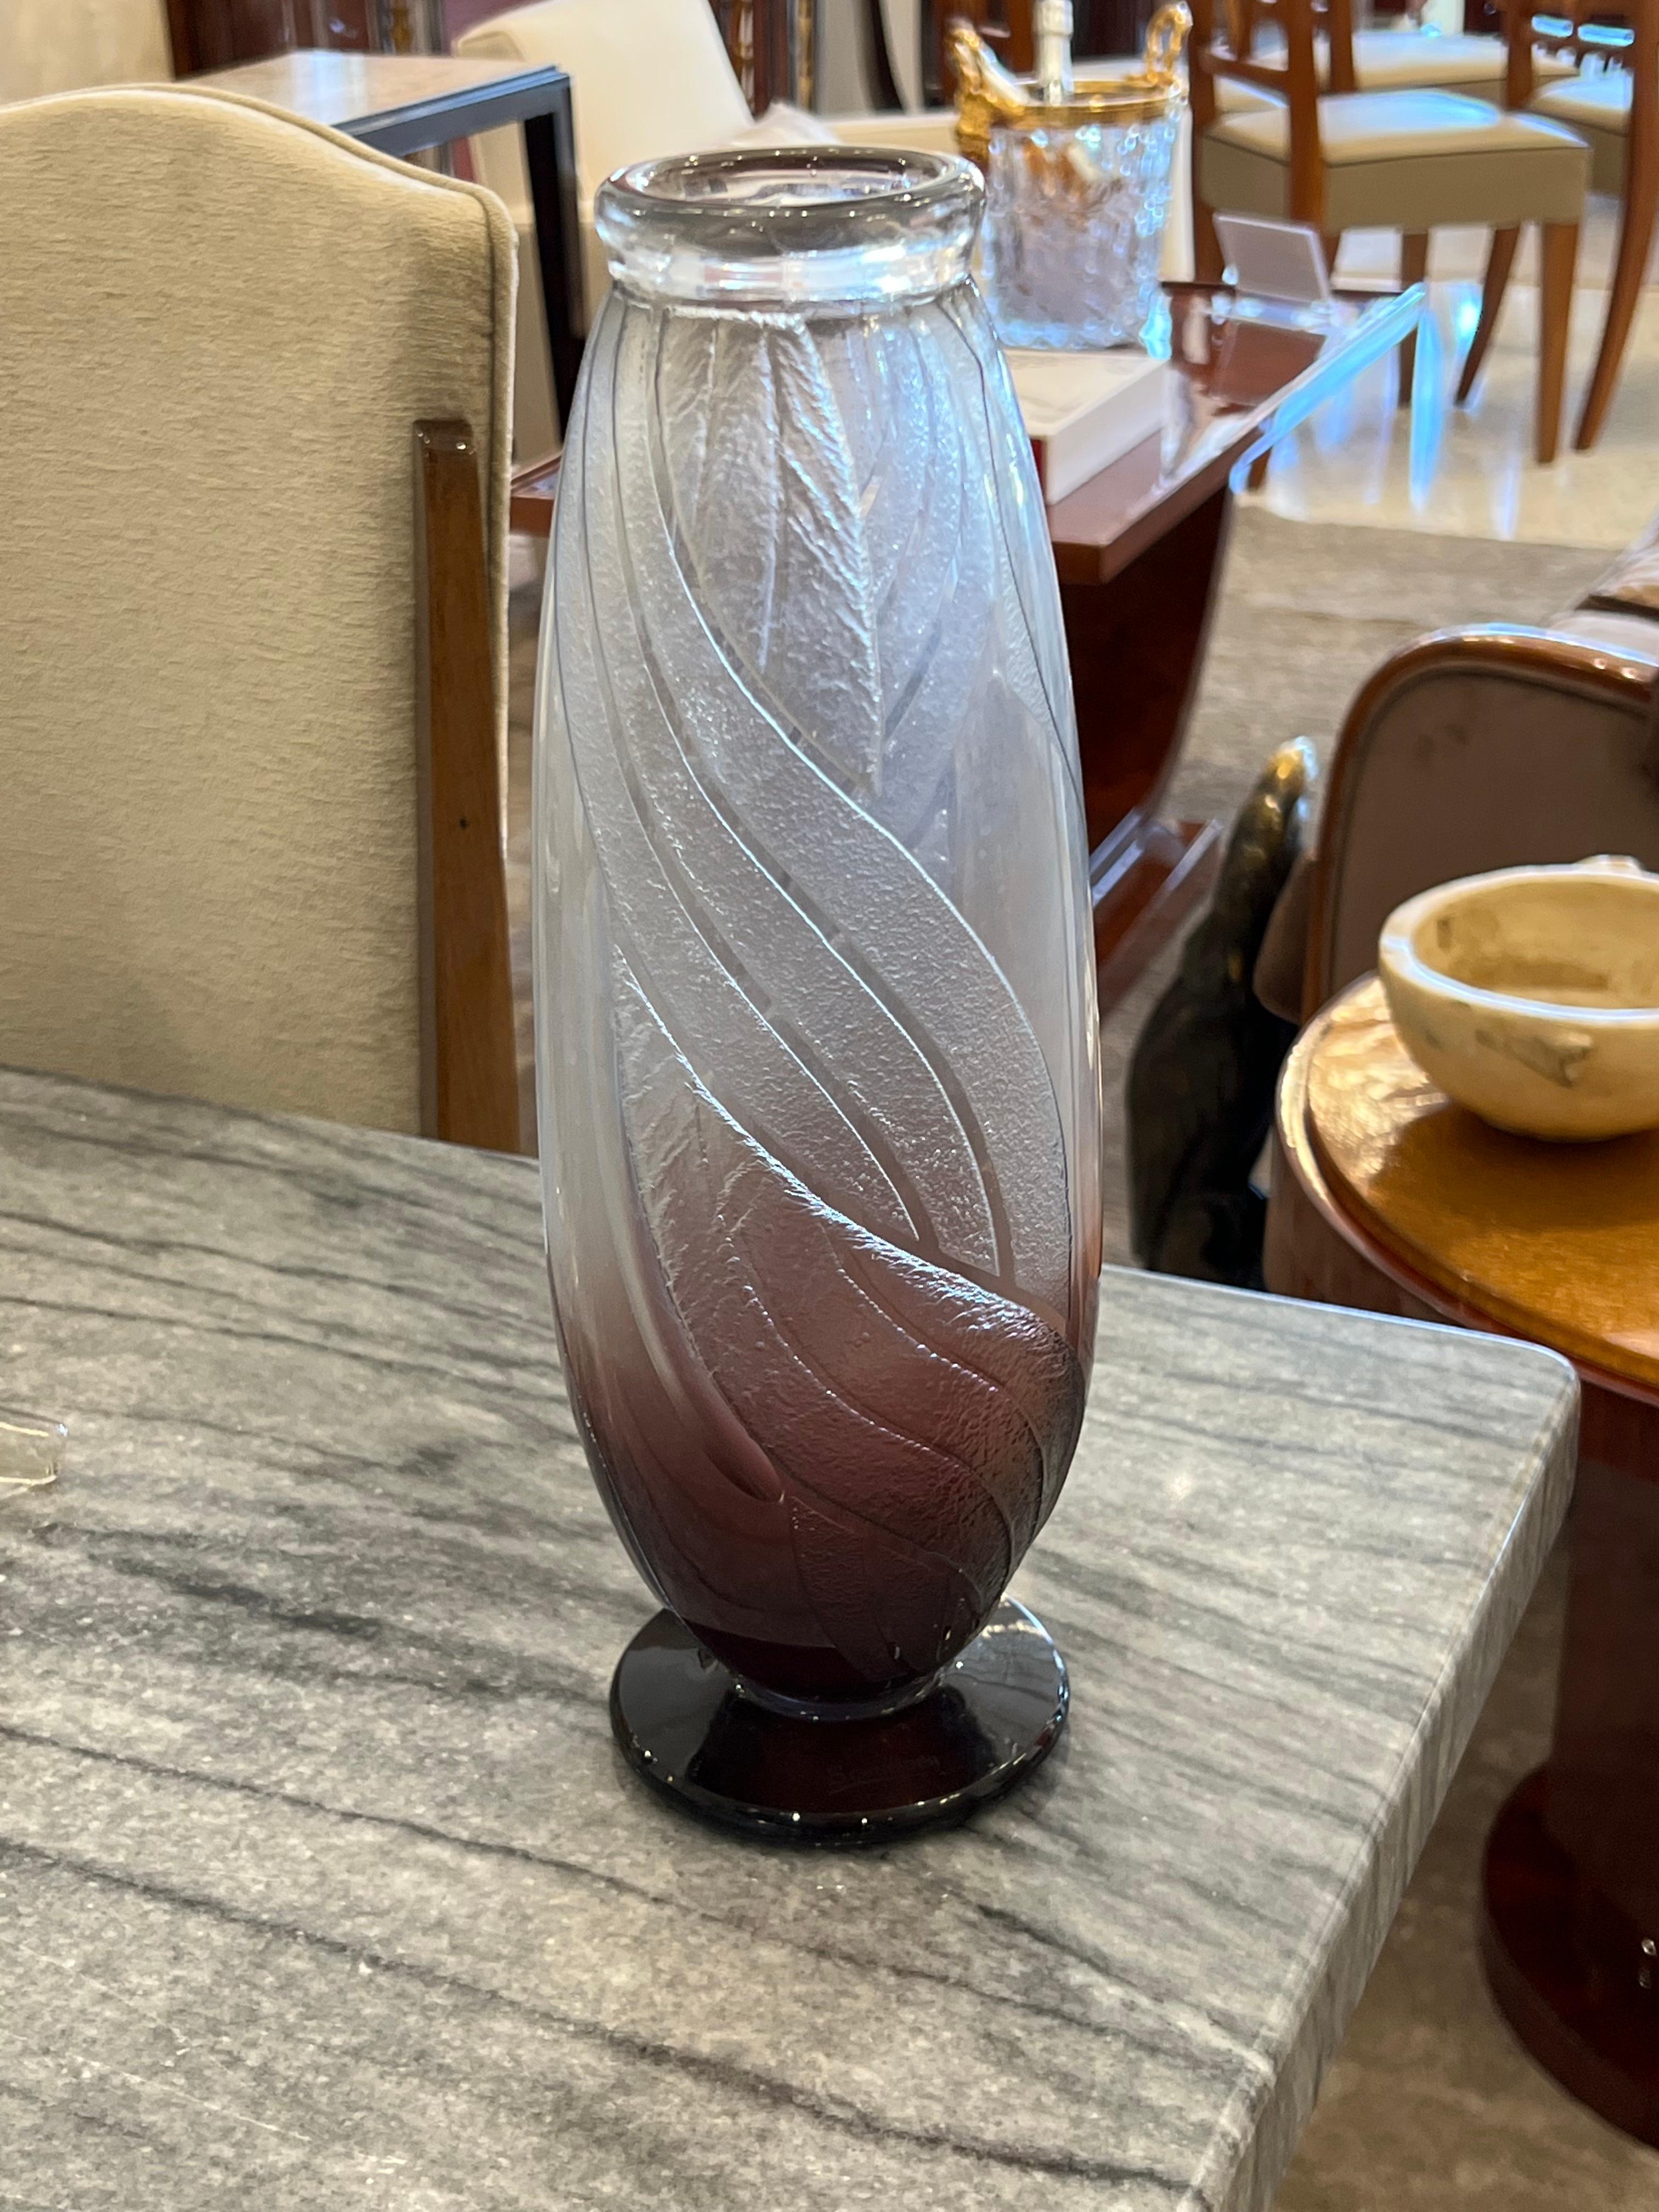 A cylindrical shaped glass vase in Clear glass with a degradé in Magenta designed by Le Verre Français.  This piece has an acid-etched twist pattern and a Magenta foot.

Charles Schneider was a renowned glassmaker during the Art Deco period in